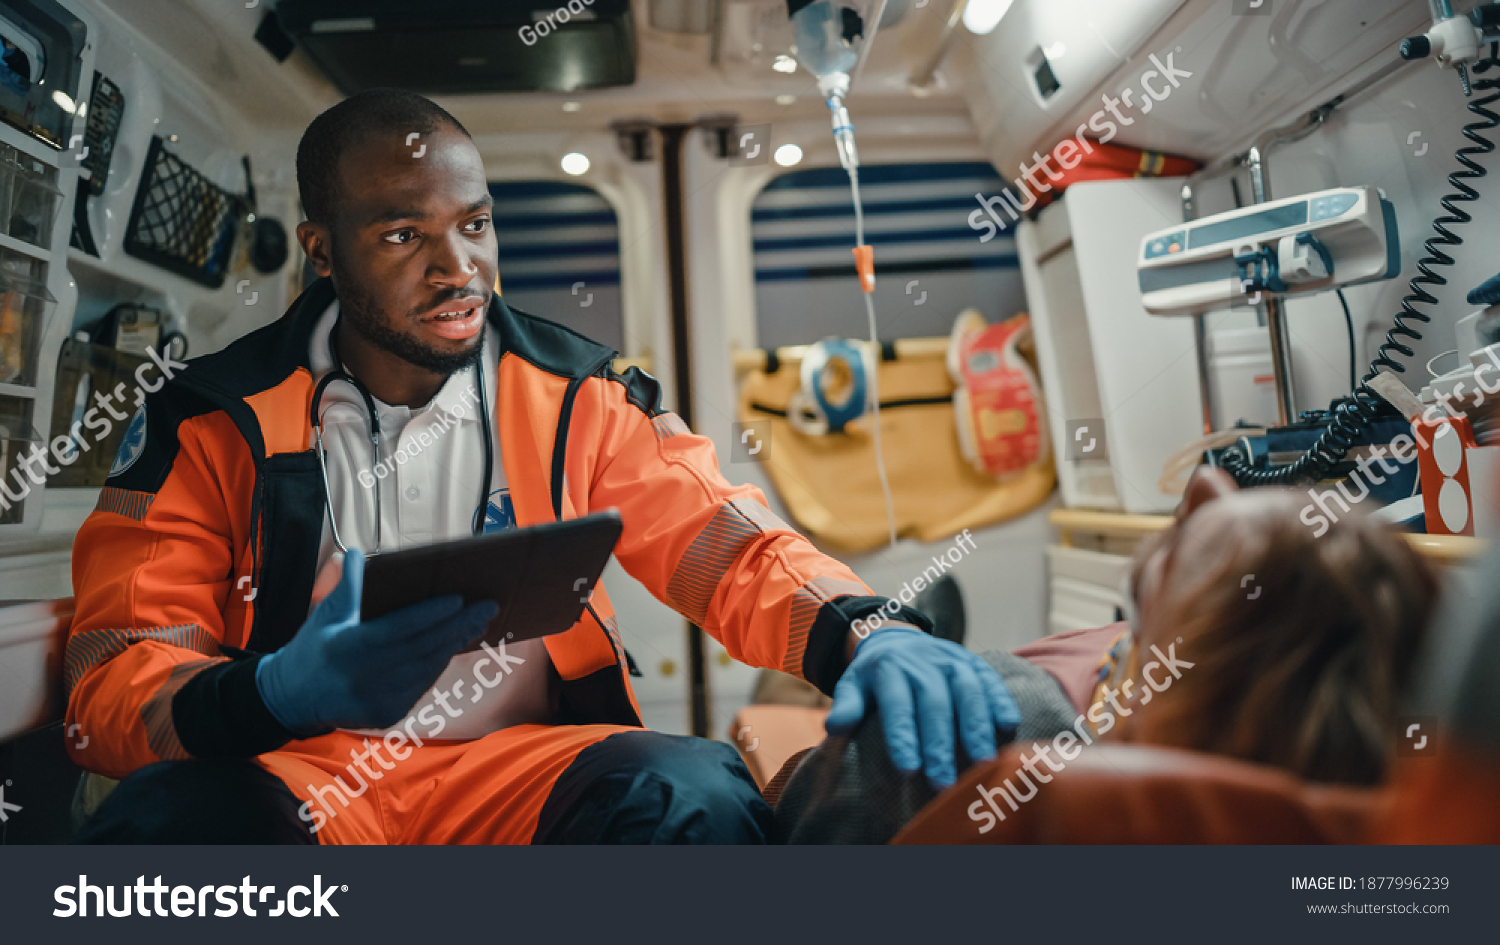 Black African American EMS Professional Paramedic Using Tablet Computer to Fill a Questionnaire for the Injured Patient on the Way to Hospital. Emergency Medical Care Assistant Works in an Ambulance. #1877996239